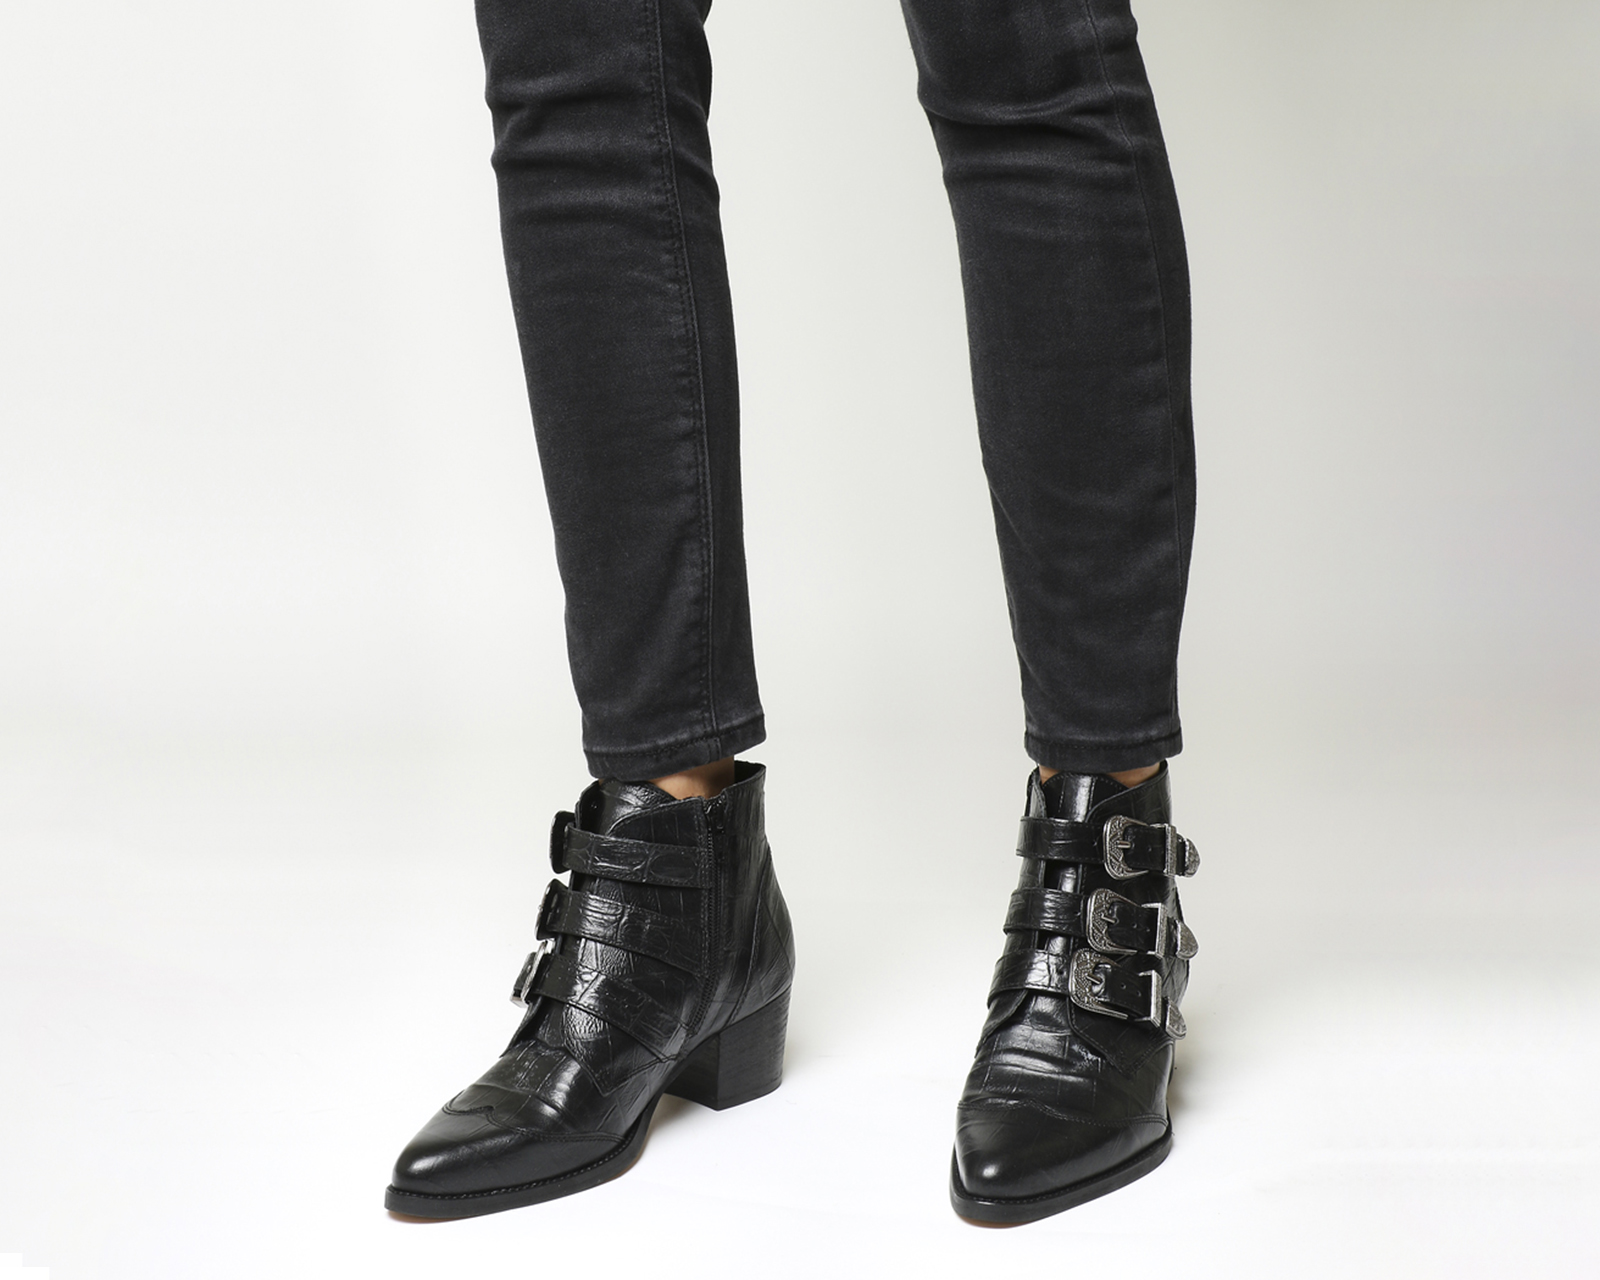 Office Jagger Multi Buckle Boots Black 